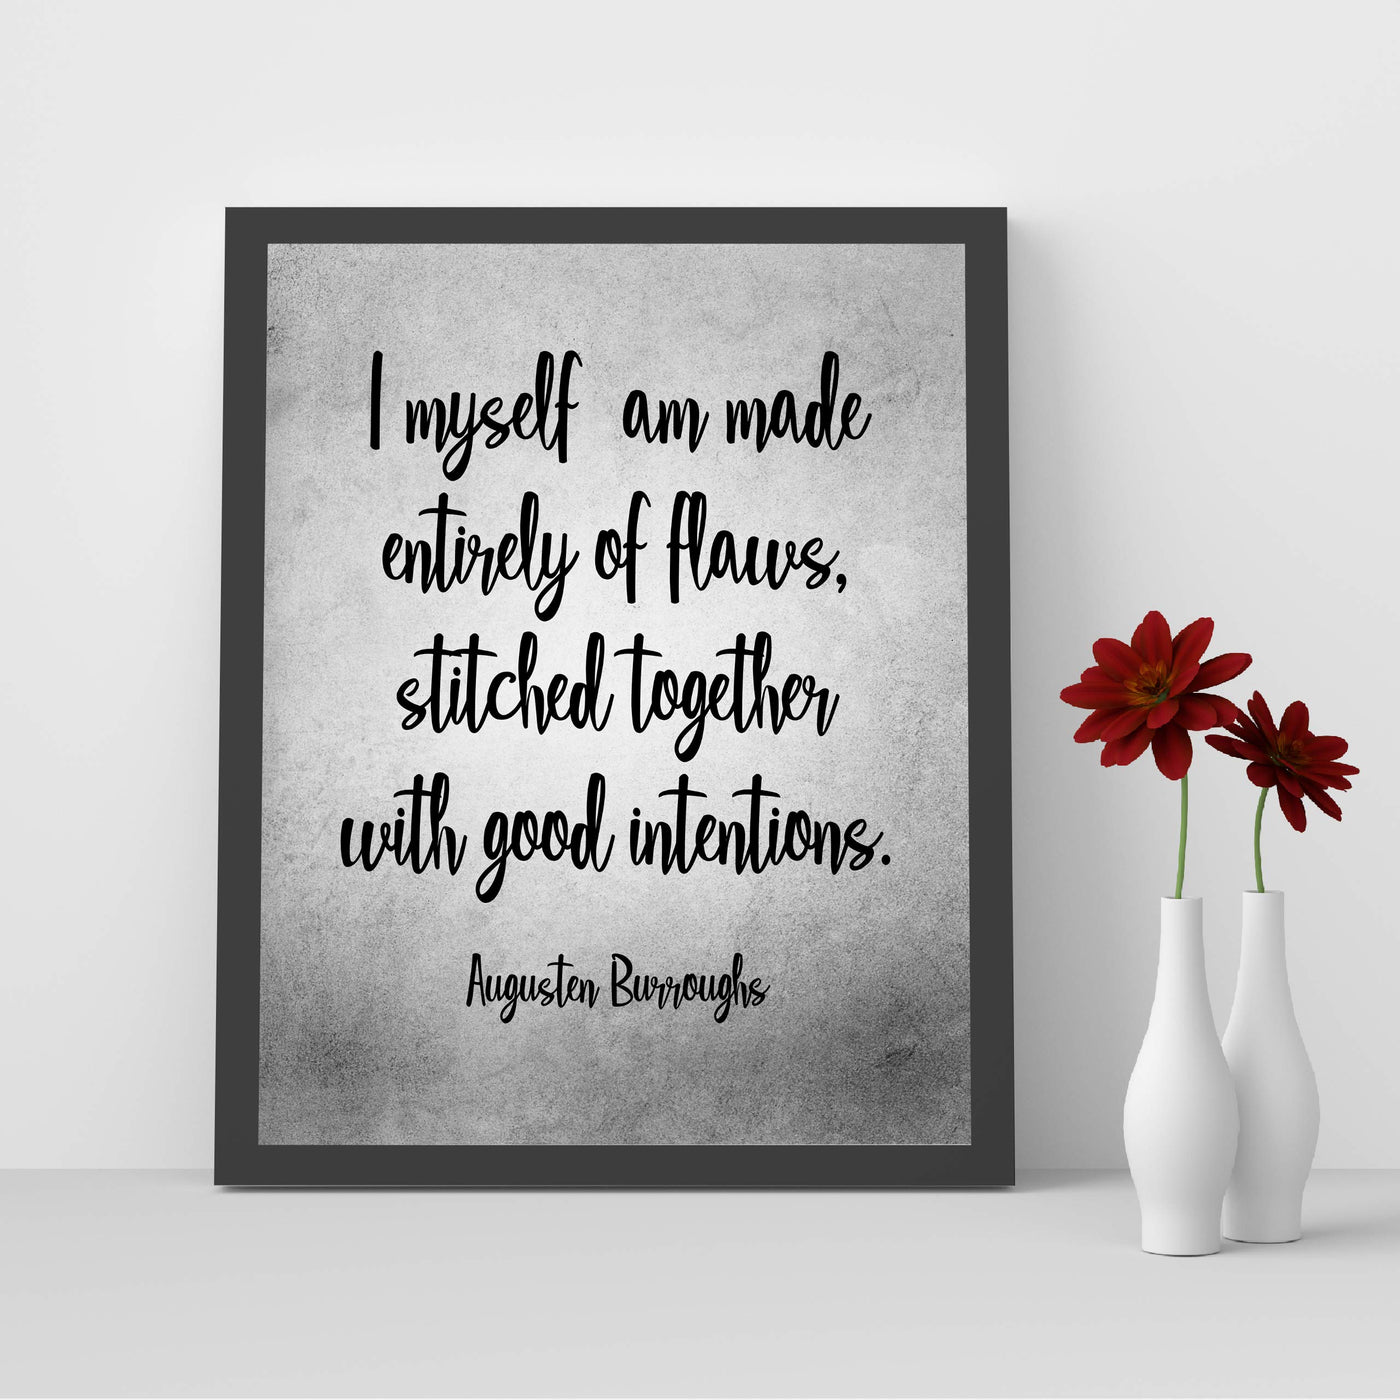 Augusten Burroughs-"I Myself Am Made Entirely of Flaws" Inspirational Life Quotes-8 x 10" Motivational Typographic Wall Art Print-Ready to Frame. Home-Office-Studio-Dorm Decor. Great Literary Gift!